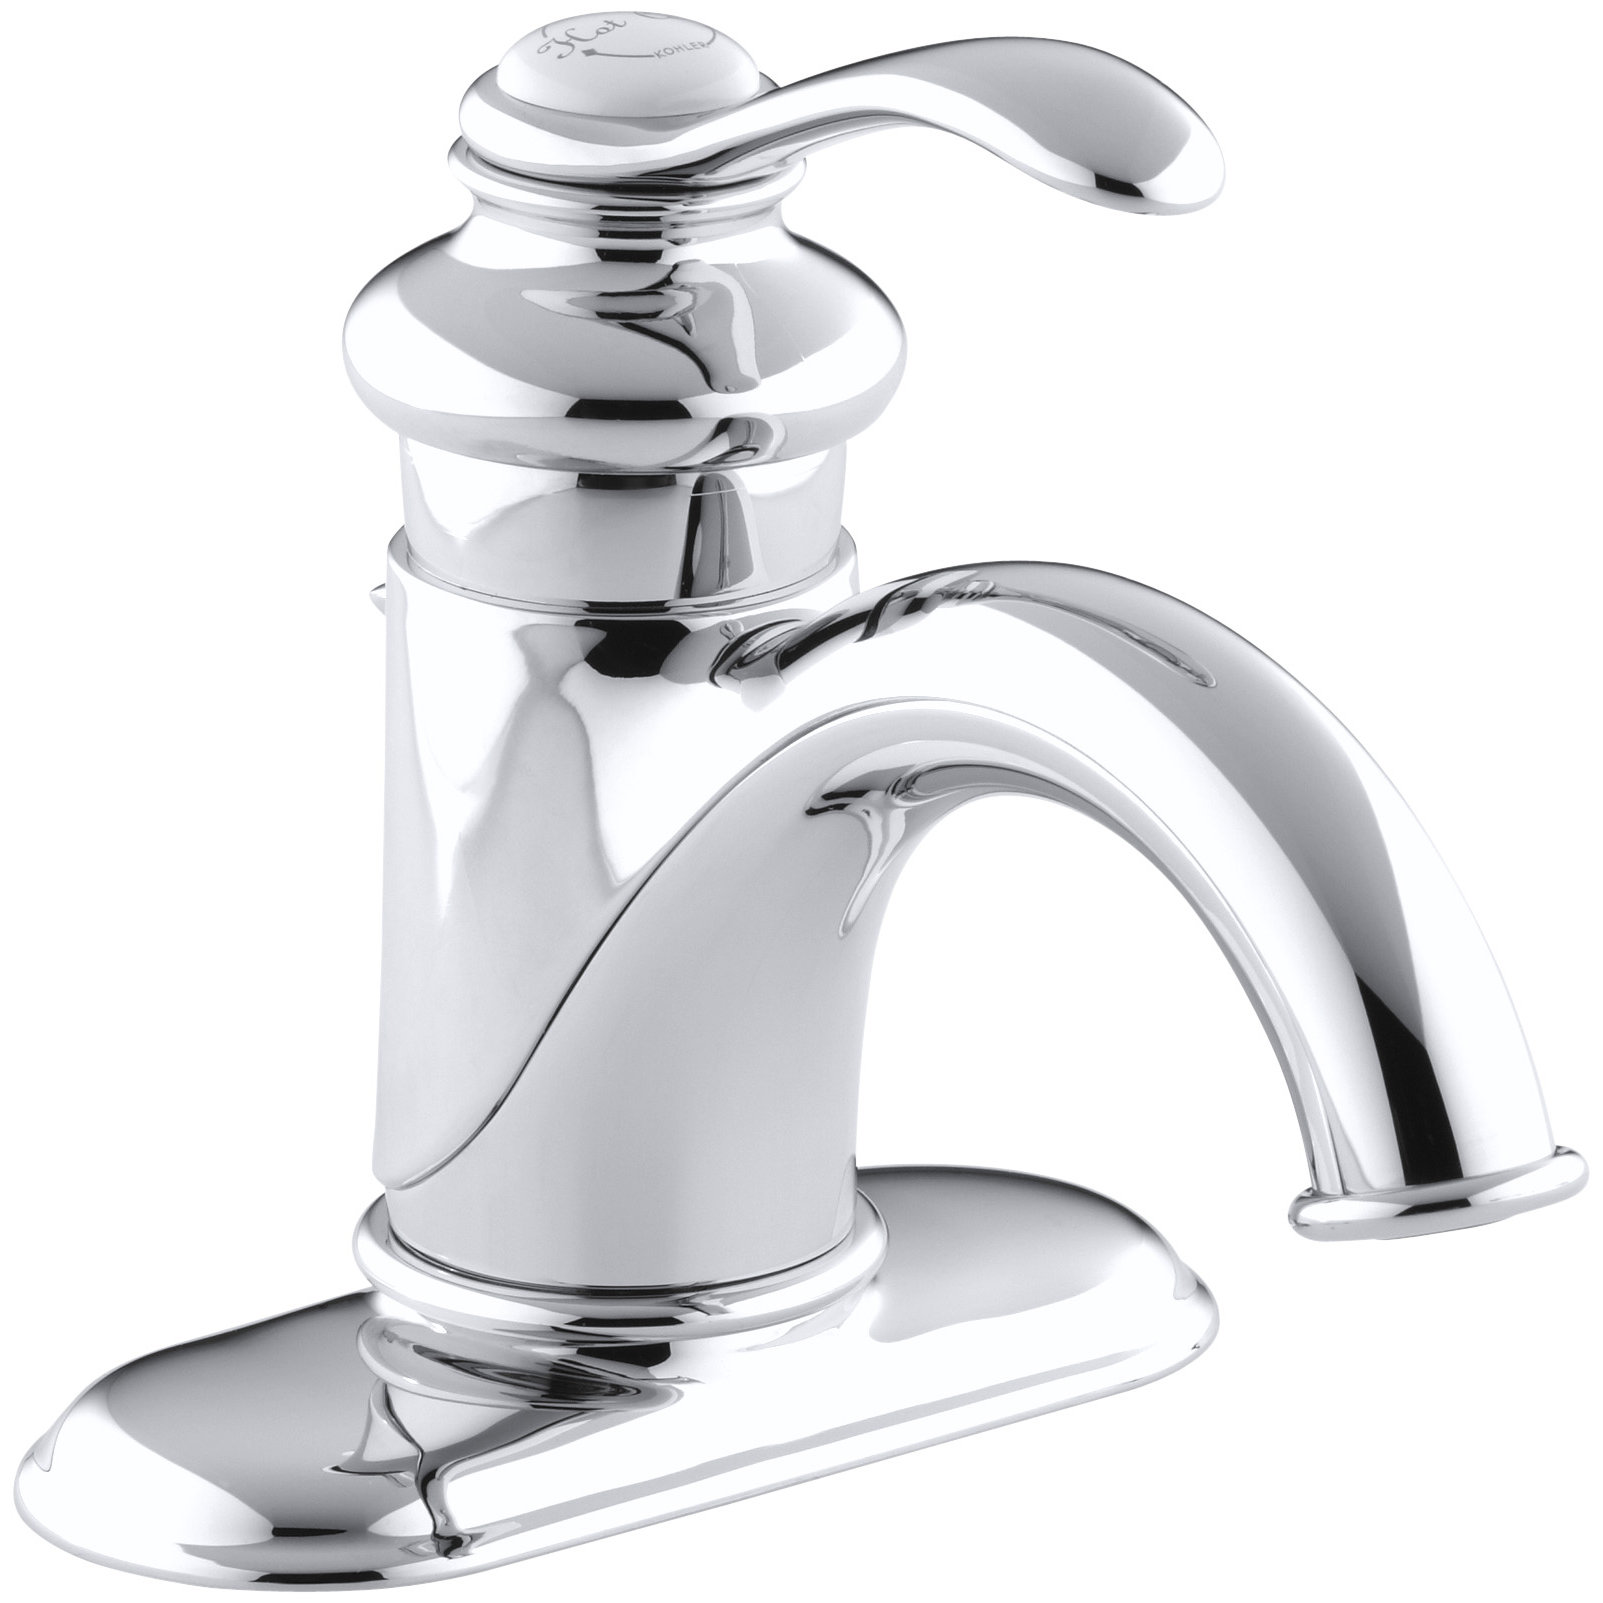 Kohler Fairfax Single Control Lavatory Faucet With Lever Handle And Pop Up Drain 12181 